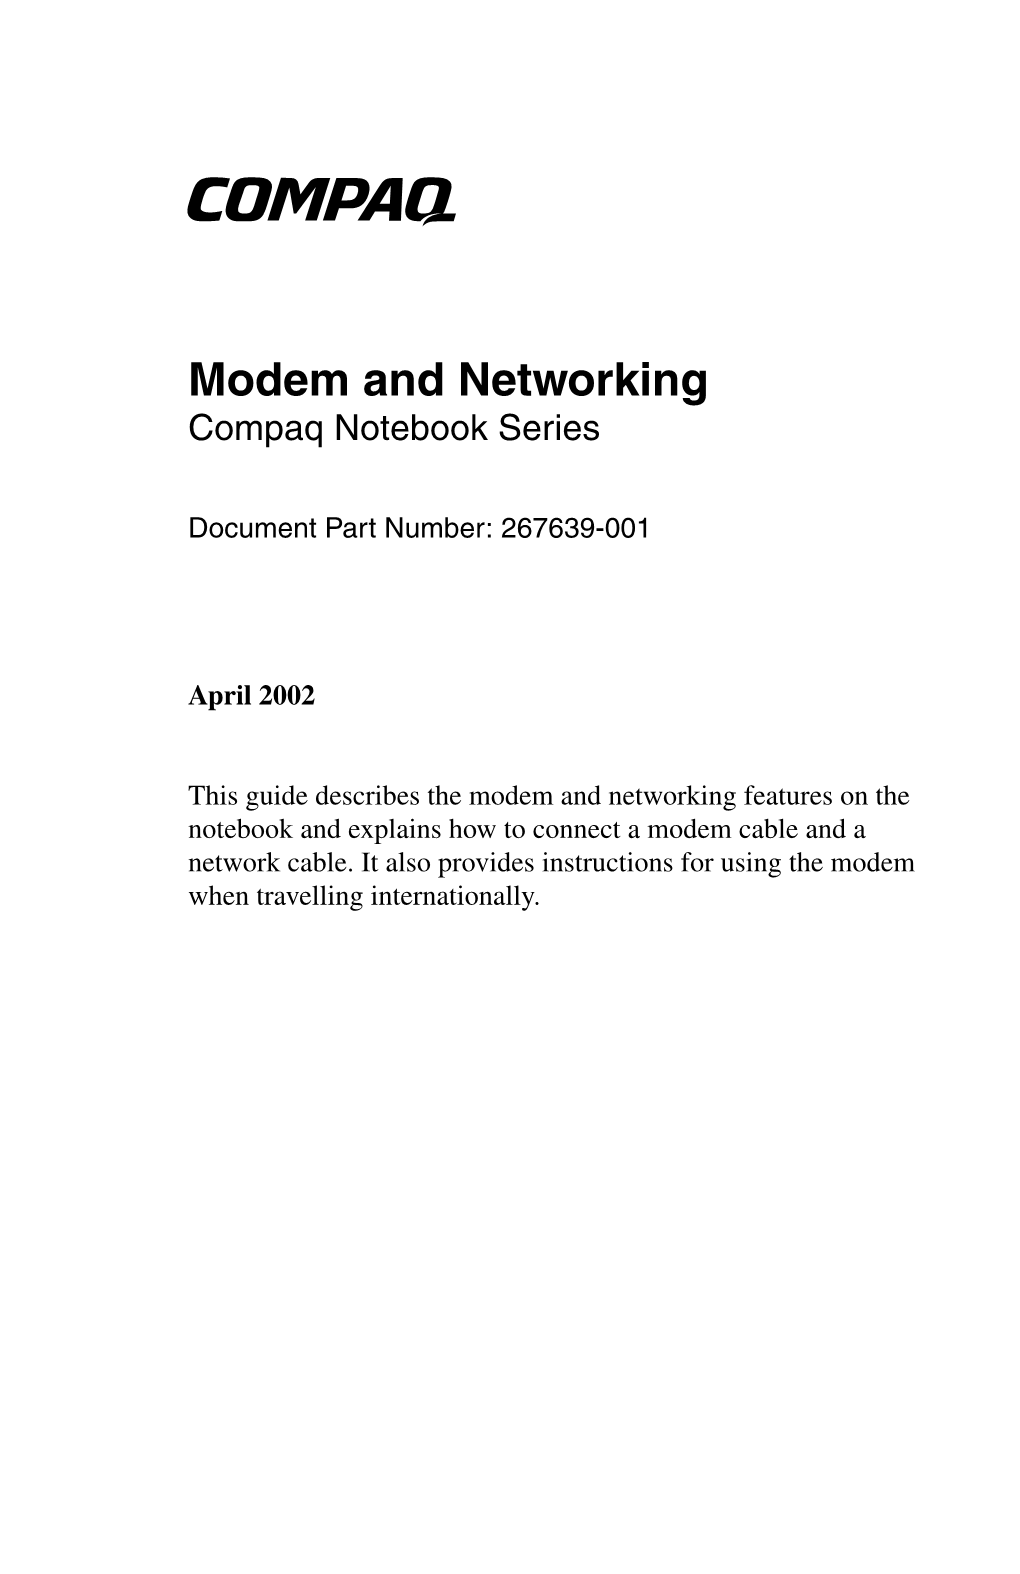 Modem and Networking Compaq Notebook Series